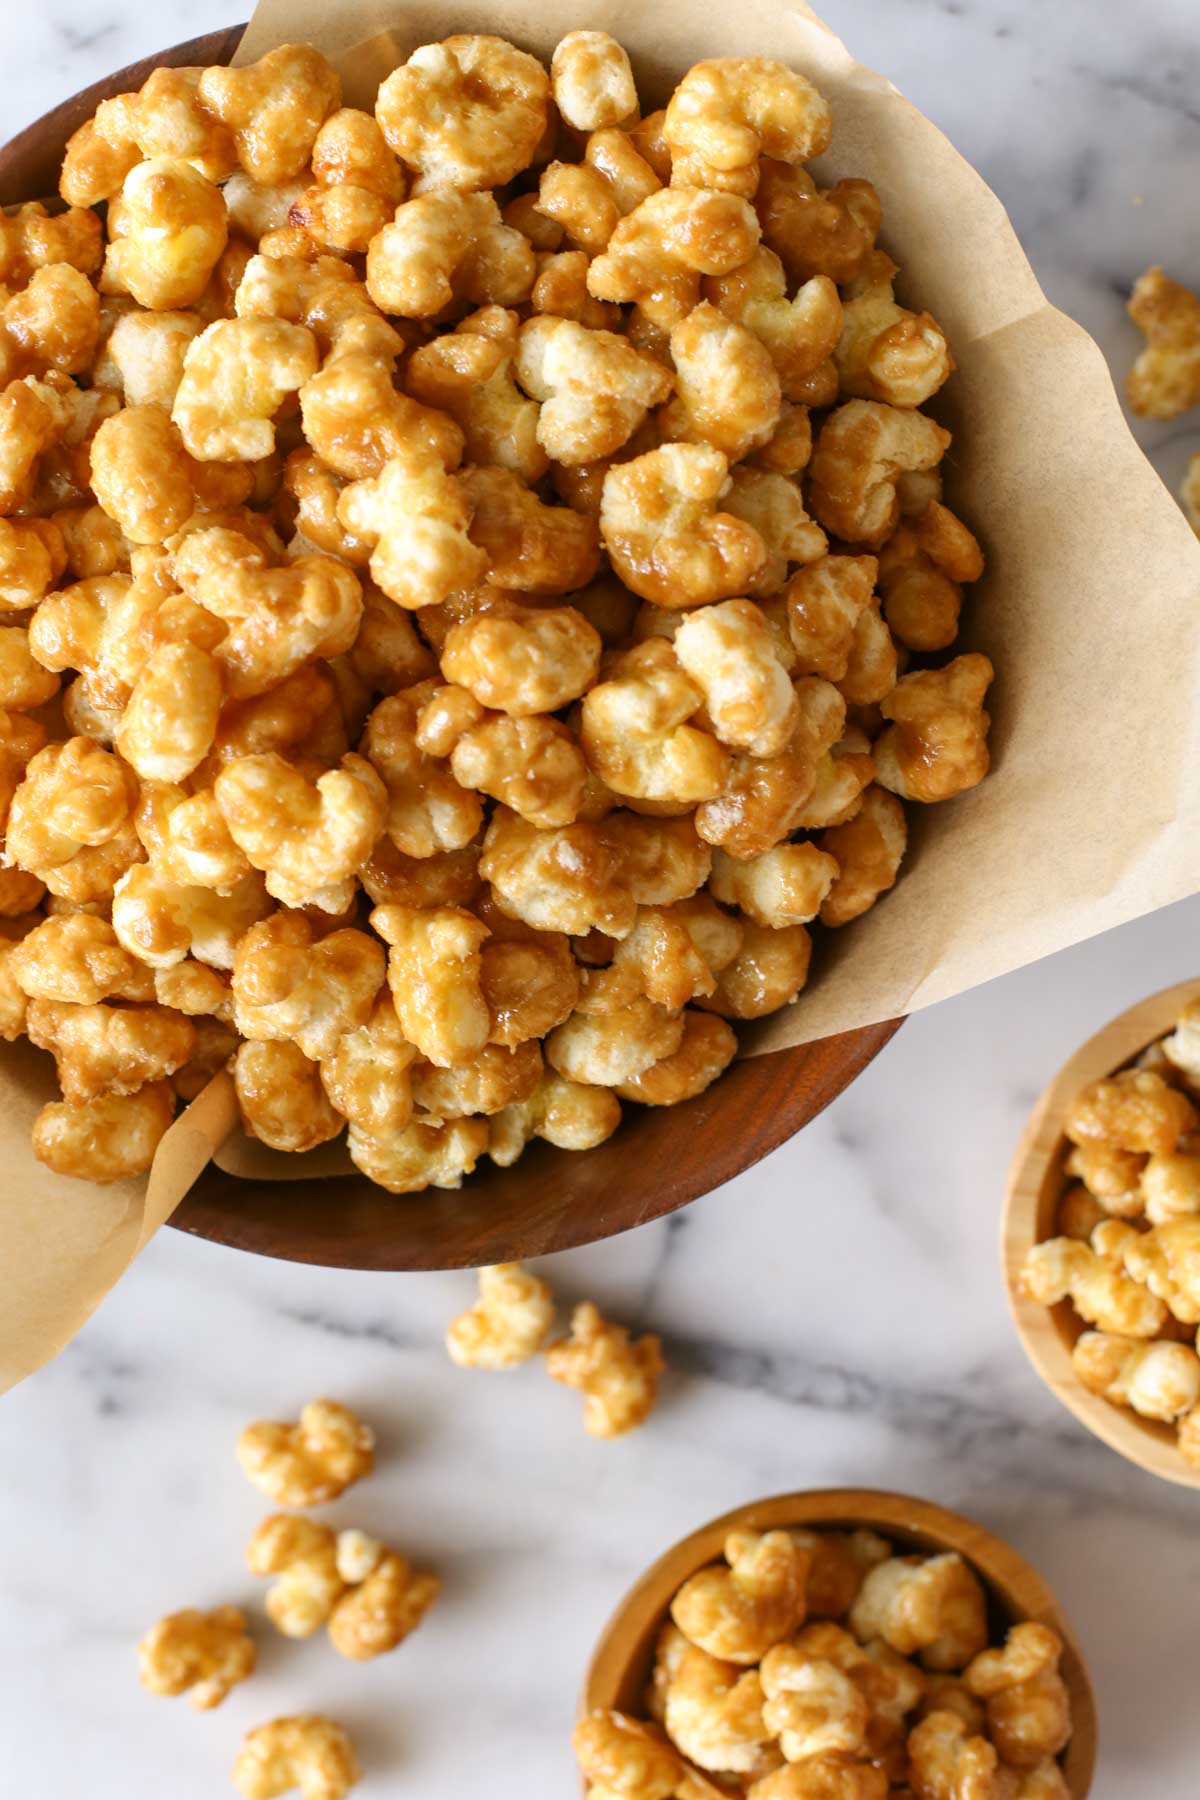 Overhead shot of Caramel Puff Corn in a wood bowl lined with parchment paper, with two small wood bowls of Caramel Puff Corn next to it.  